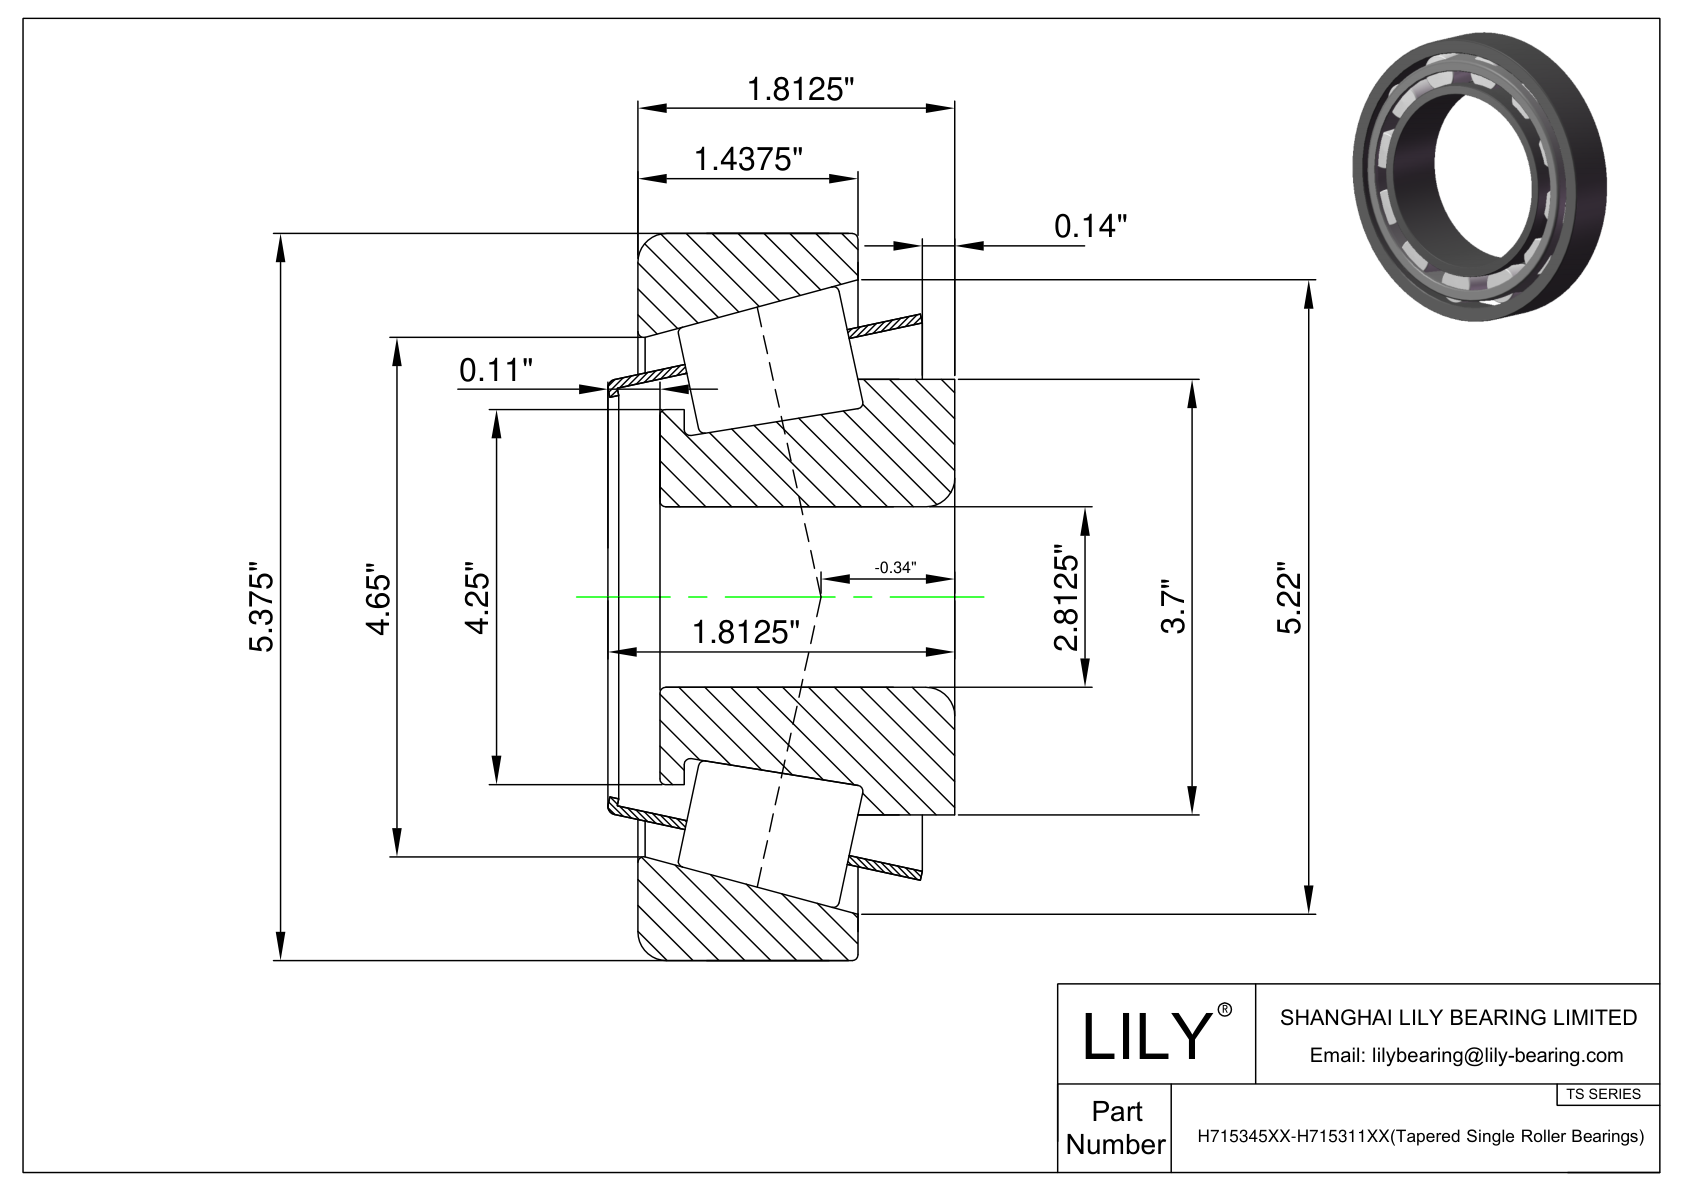 H715345XX-H715311XX TS (Tapered Single Roller Bearings) (Imperial) cad drawing